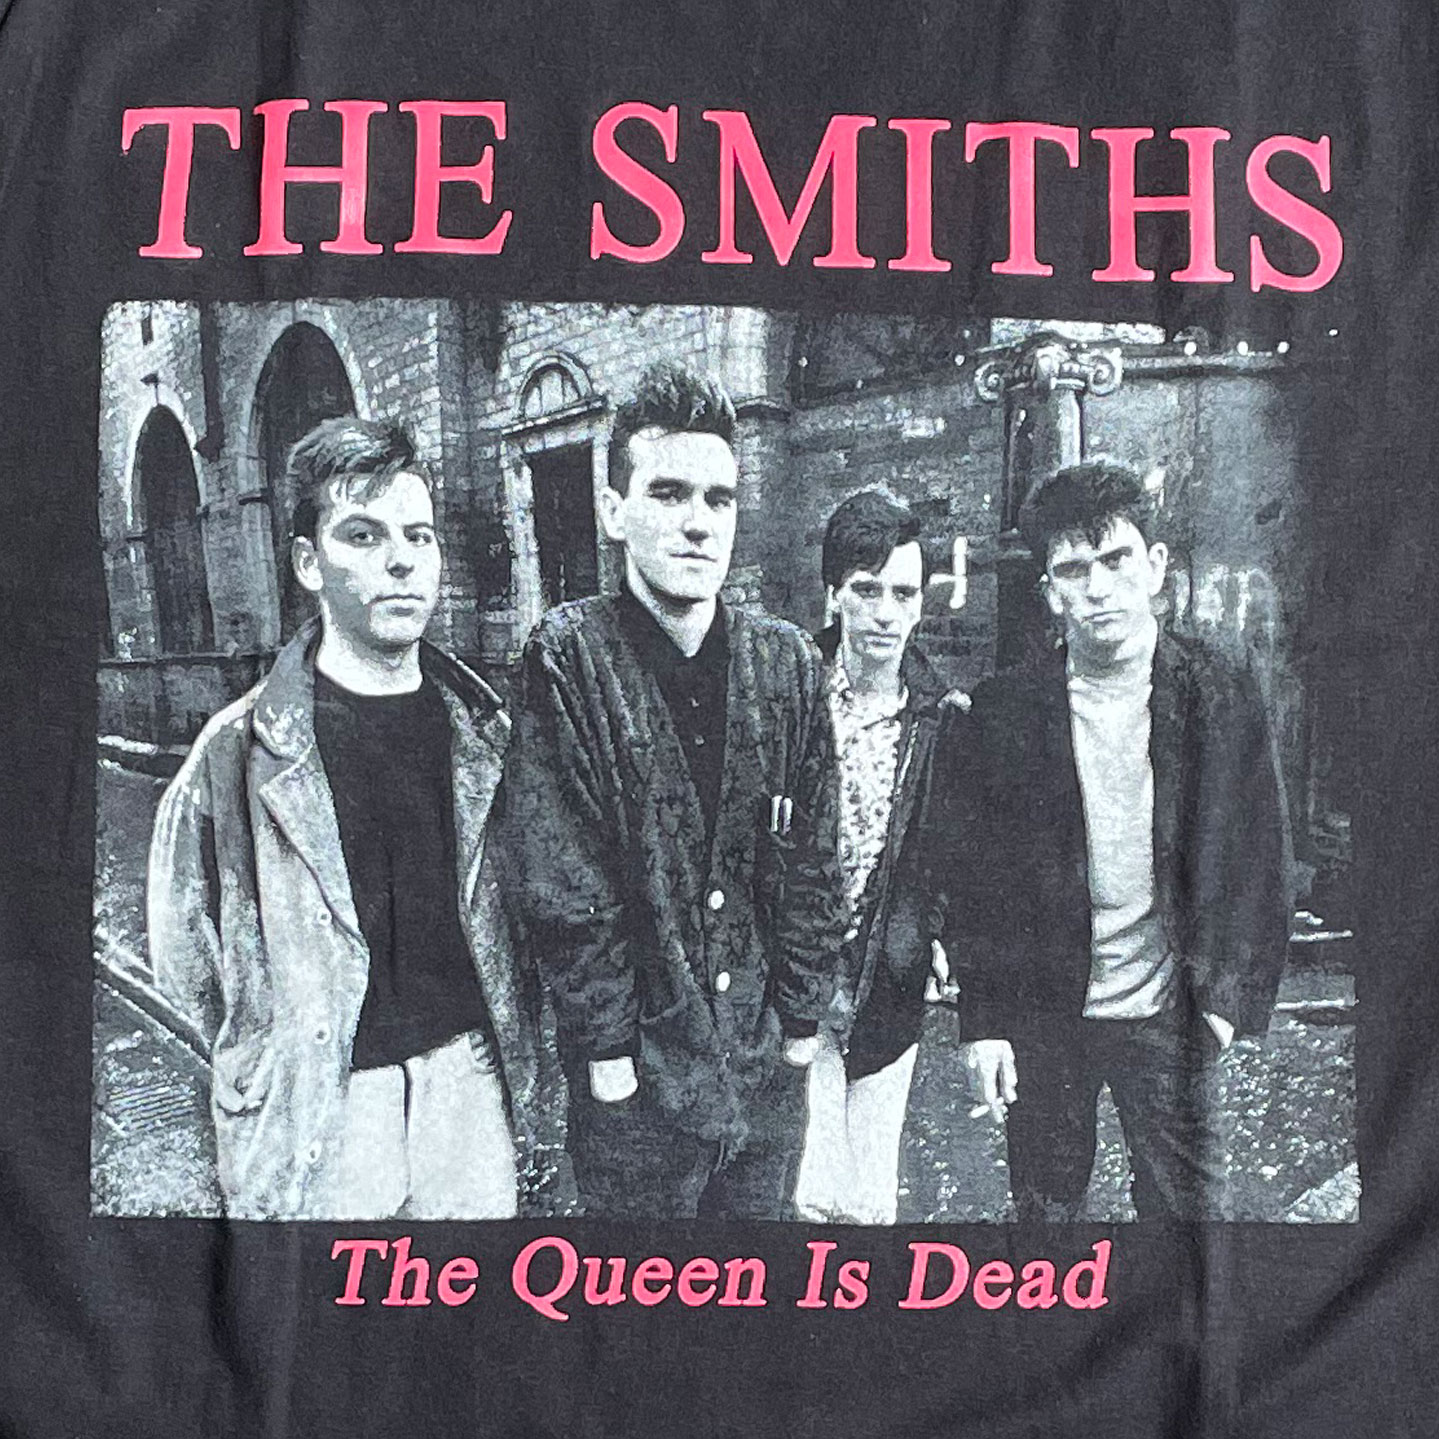 THE SMITH Tシャツ THE QUEEN IS DEAD PHOTO